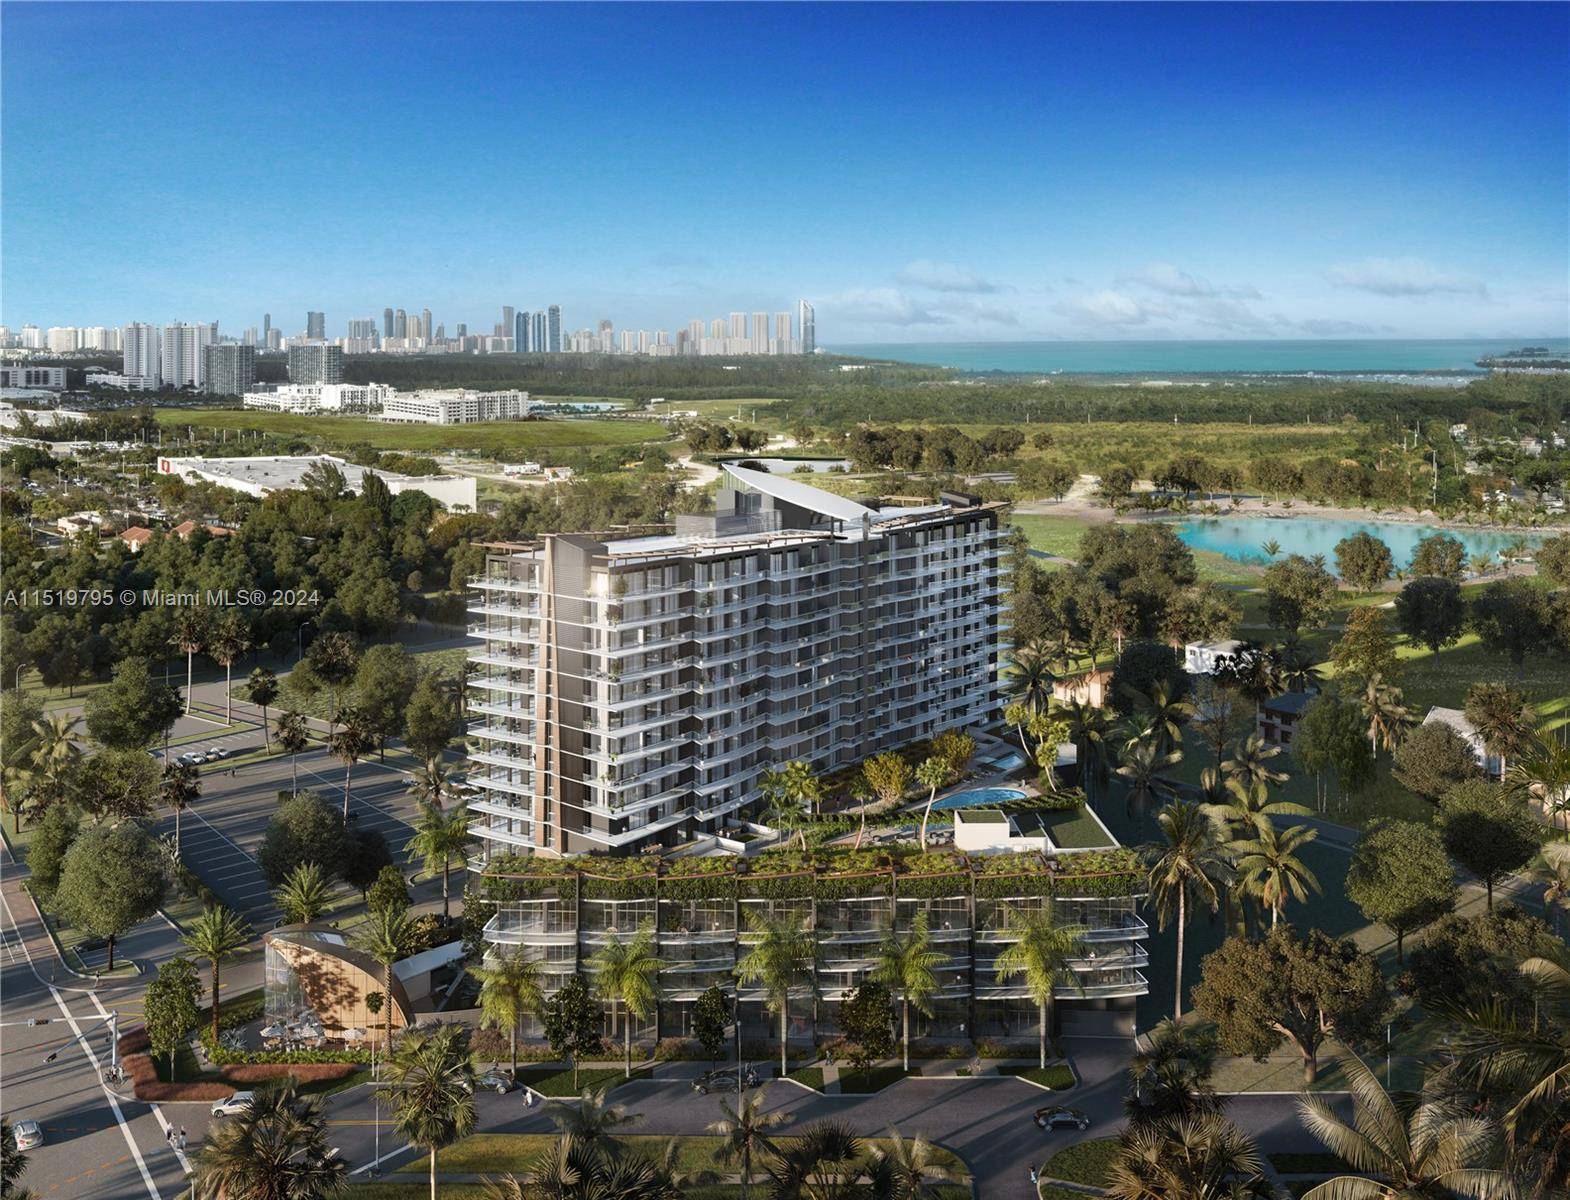 Fabulous Studio with unobstructed views in the most exciting residential development coming to North Miami Beach.